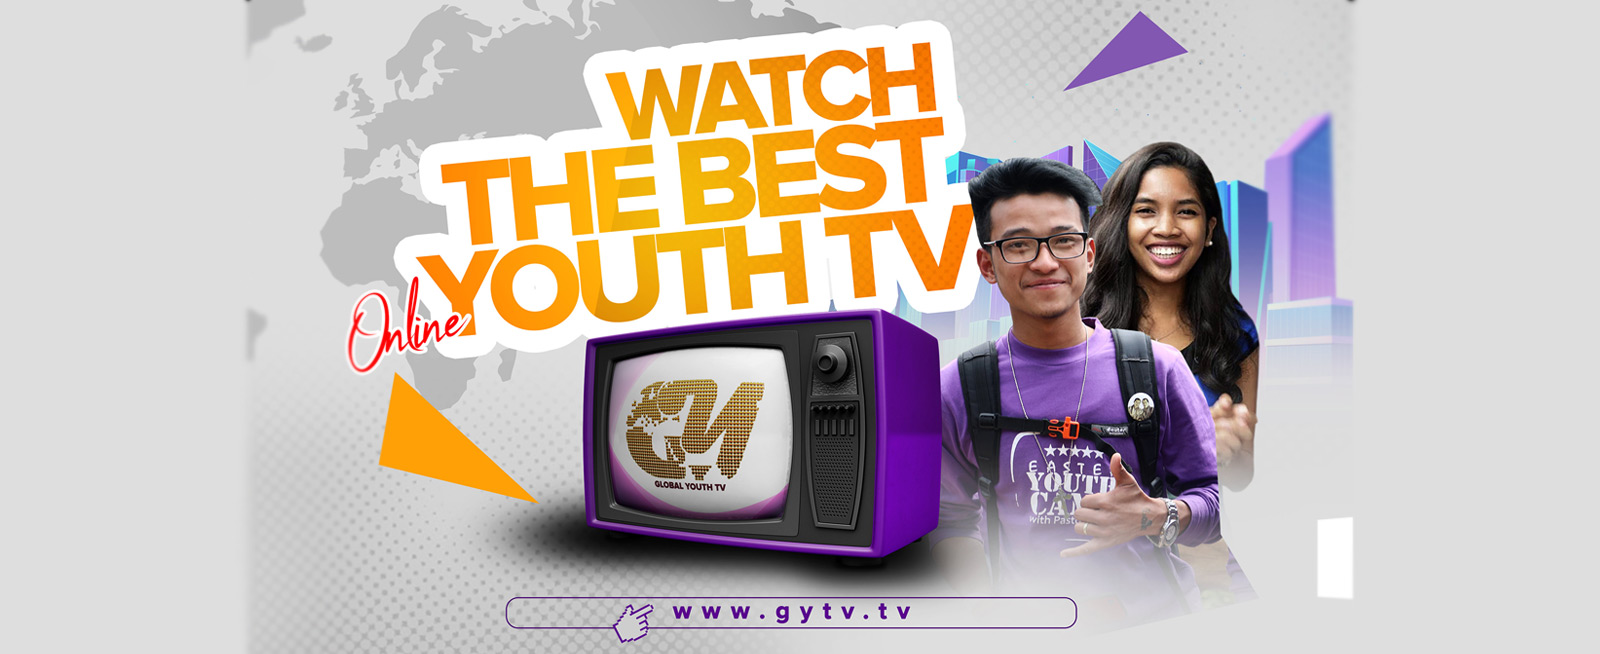 Watch Global Youth TV - GYTV online